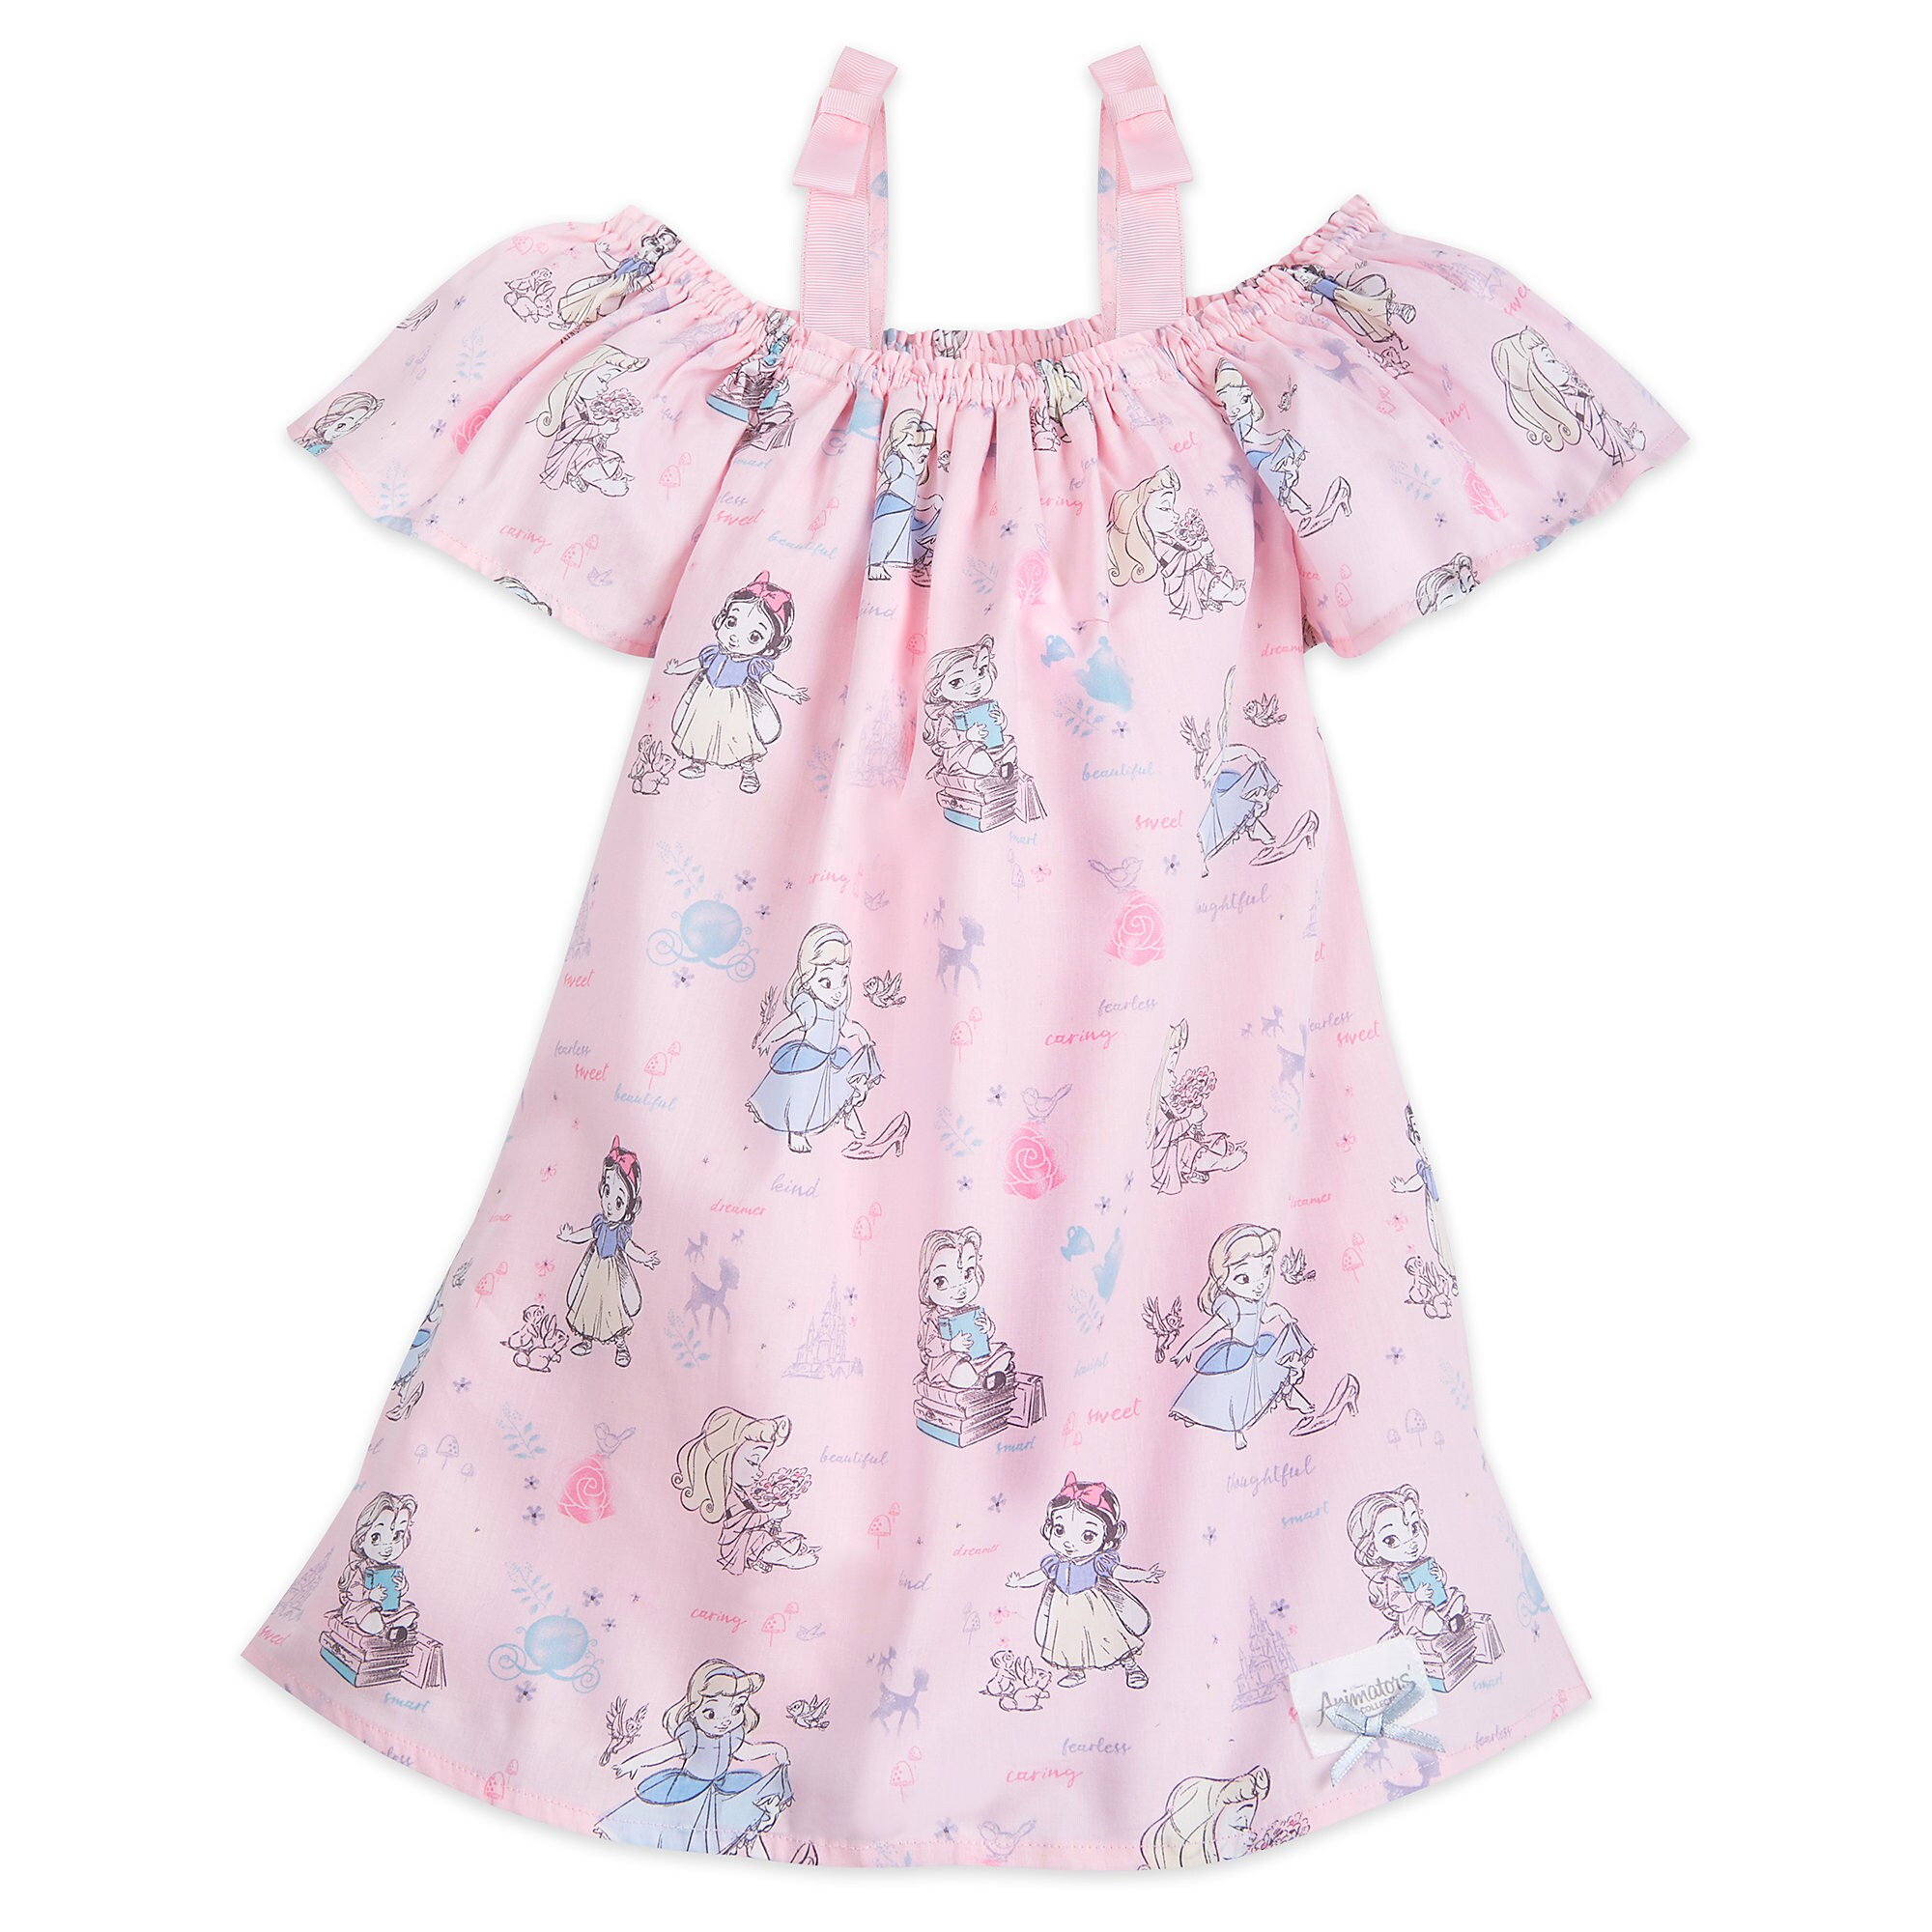 Disney Animators' Collection Sun Dress for Girls is now available – Dis ...